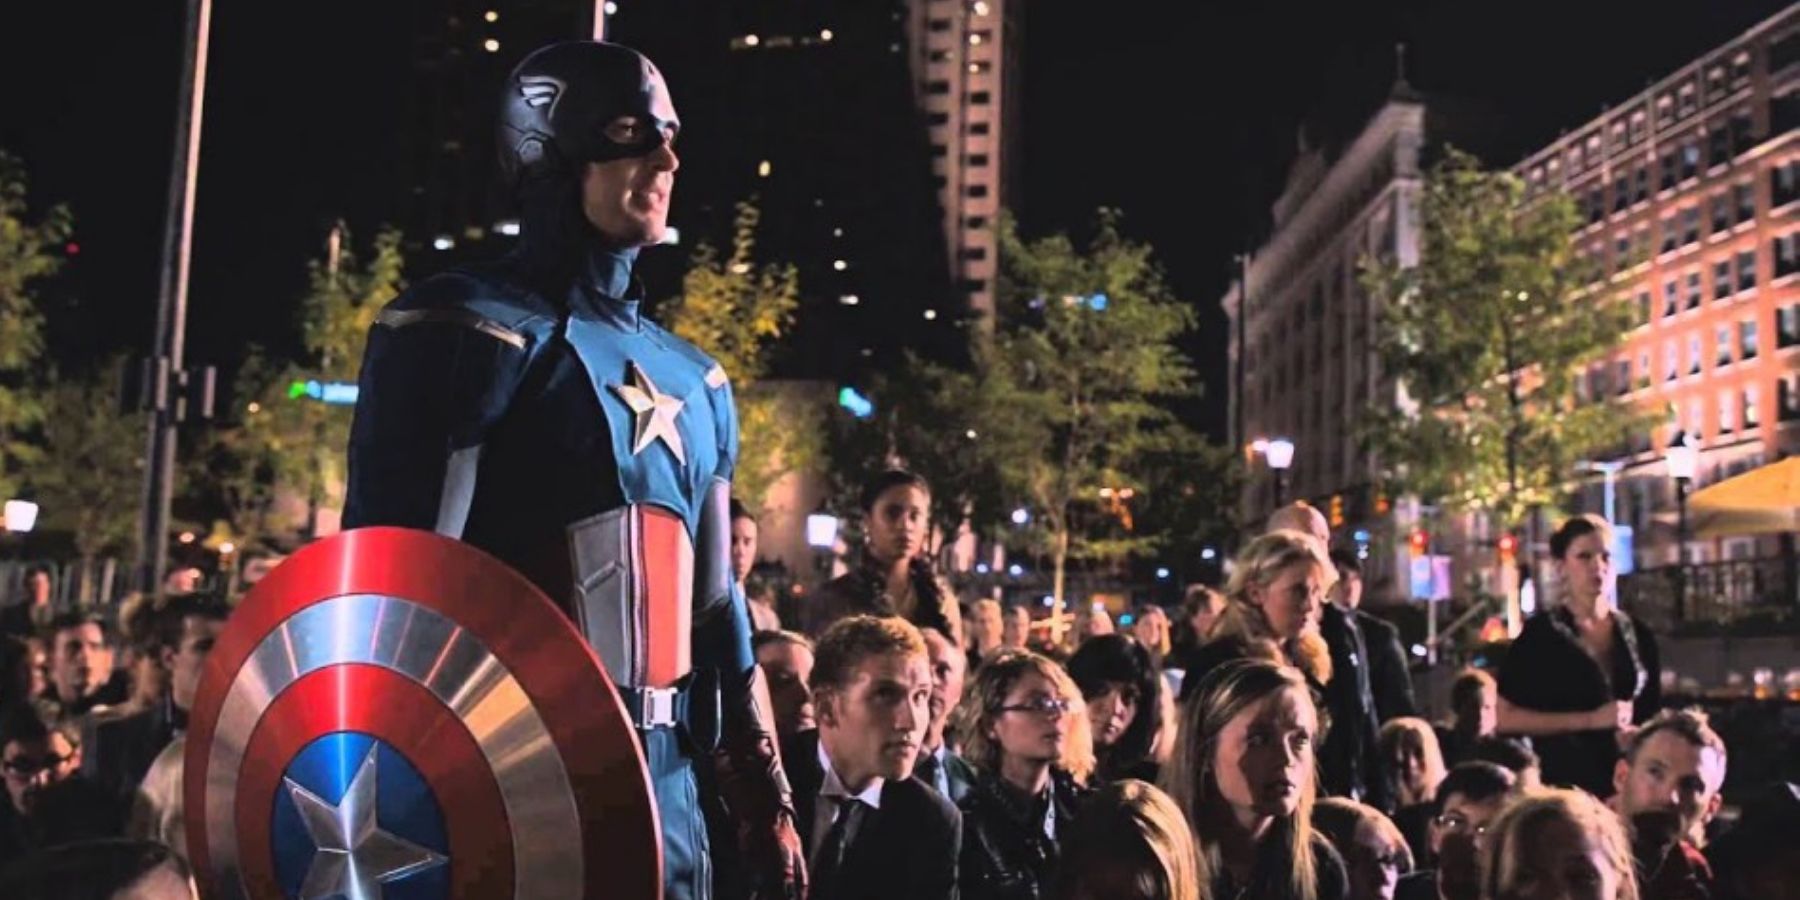 Steve Rogers speaks to Loki from the crowd in The Avengers